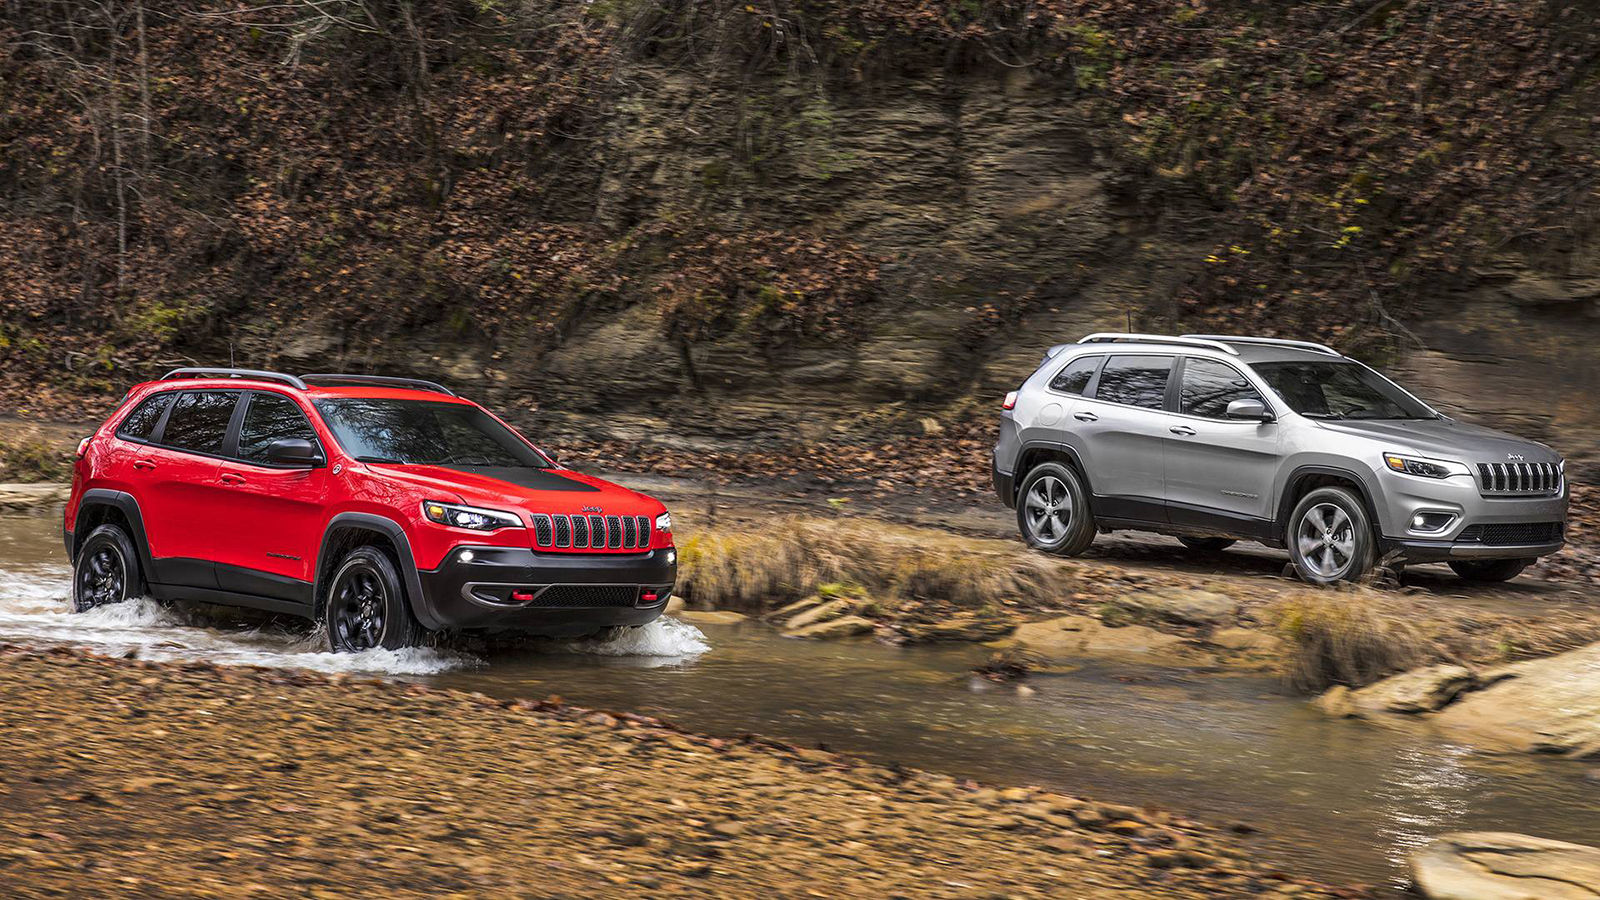 Jeep Cherokee: The Facelift